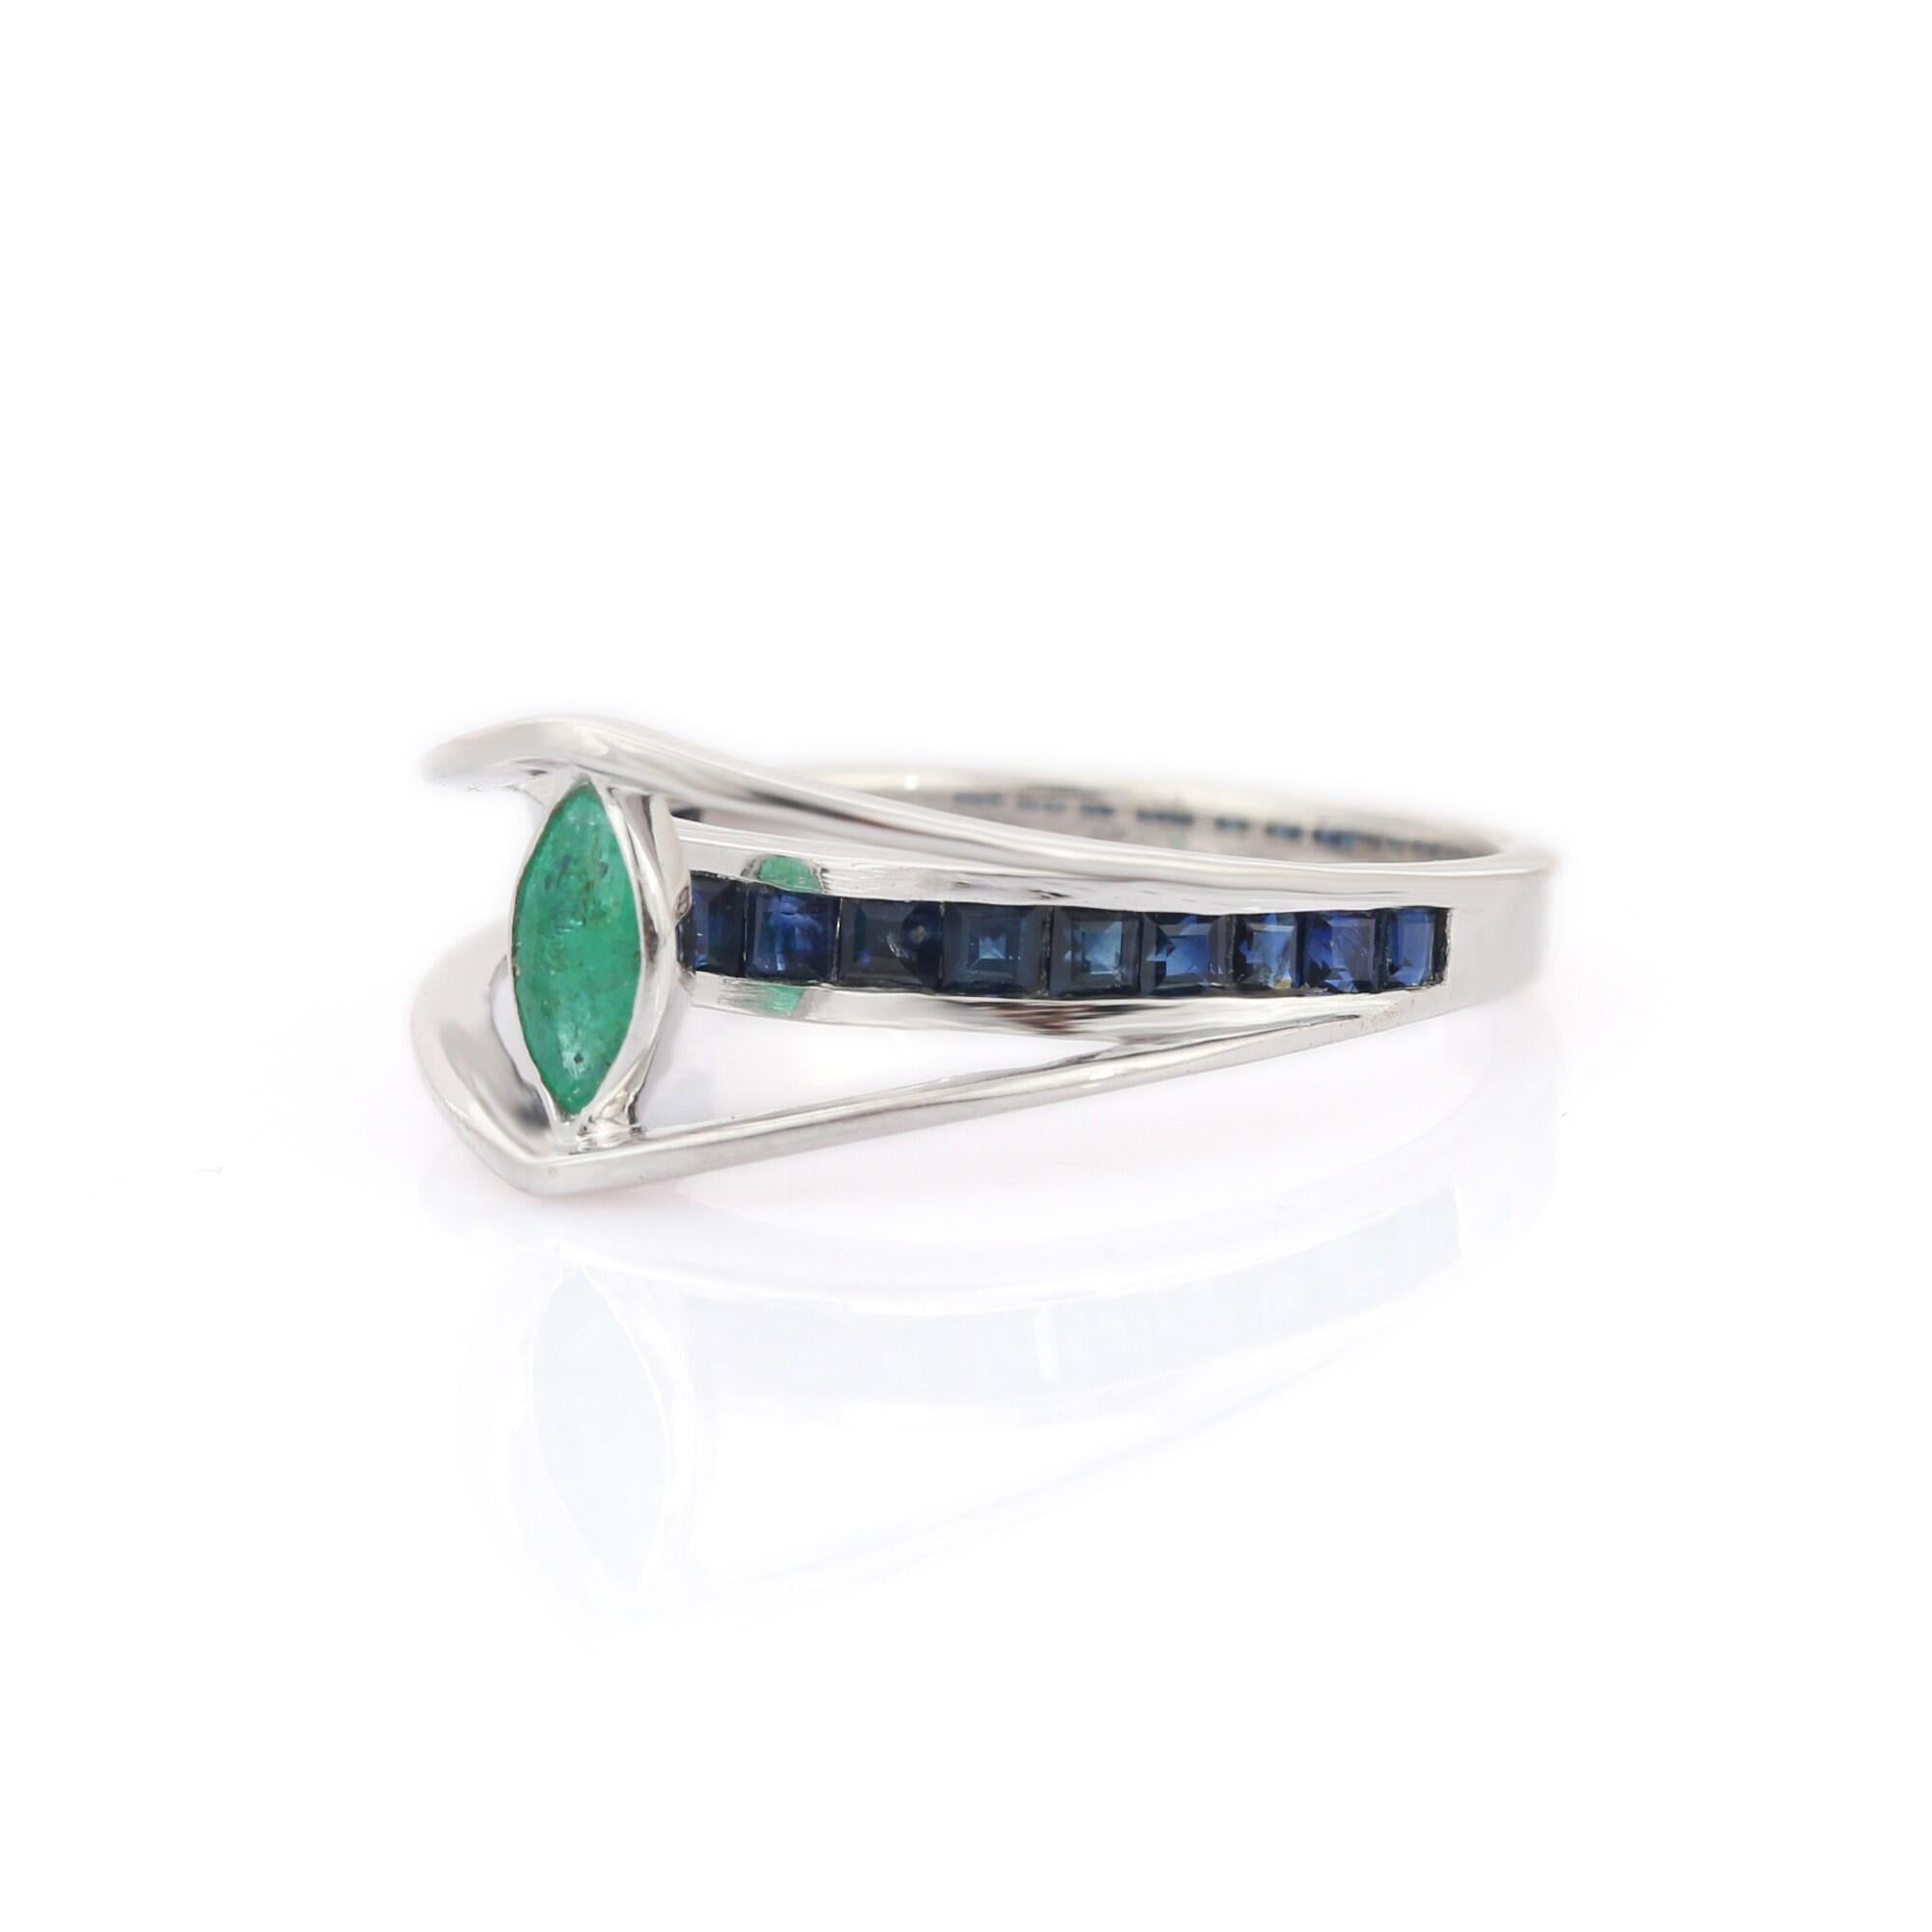 For Sale:  925 Sterling Silver Natural Emerald and Sapphire Ring, Christmas Gifts 2